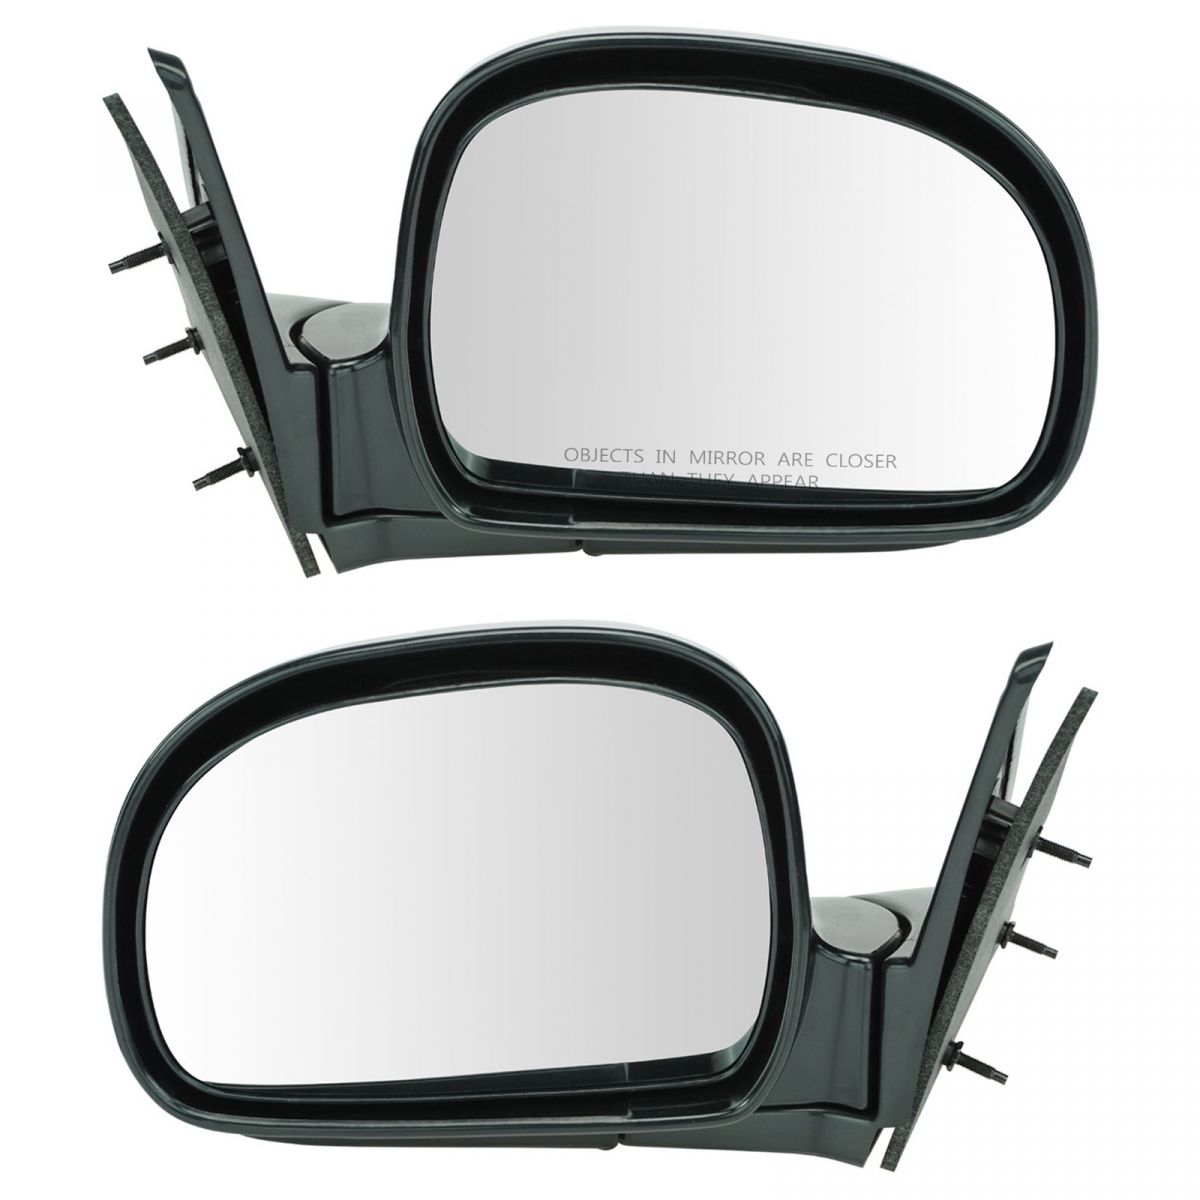 Details About Manual Side View Mirrors Left Right Pair Set For Blazer Jimmy S10 Pickup Truck